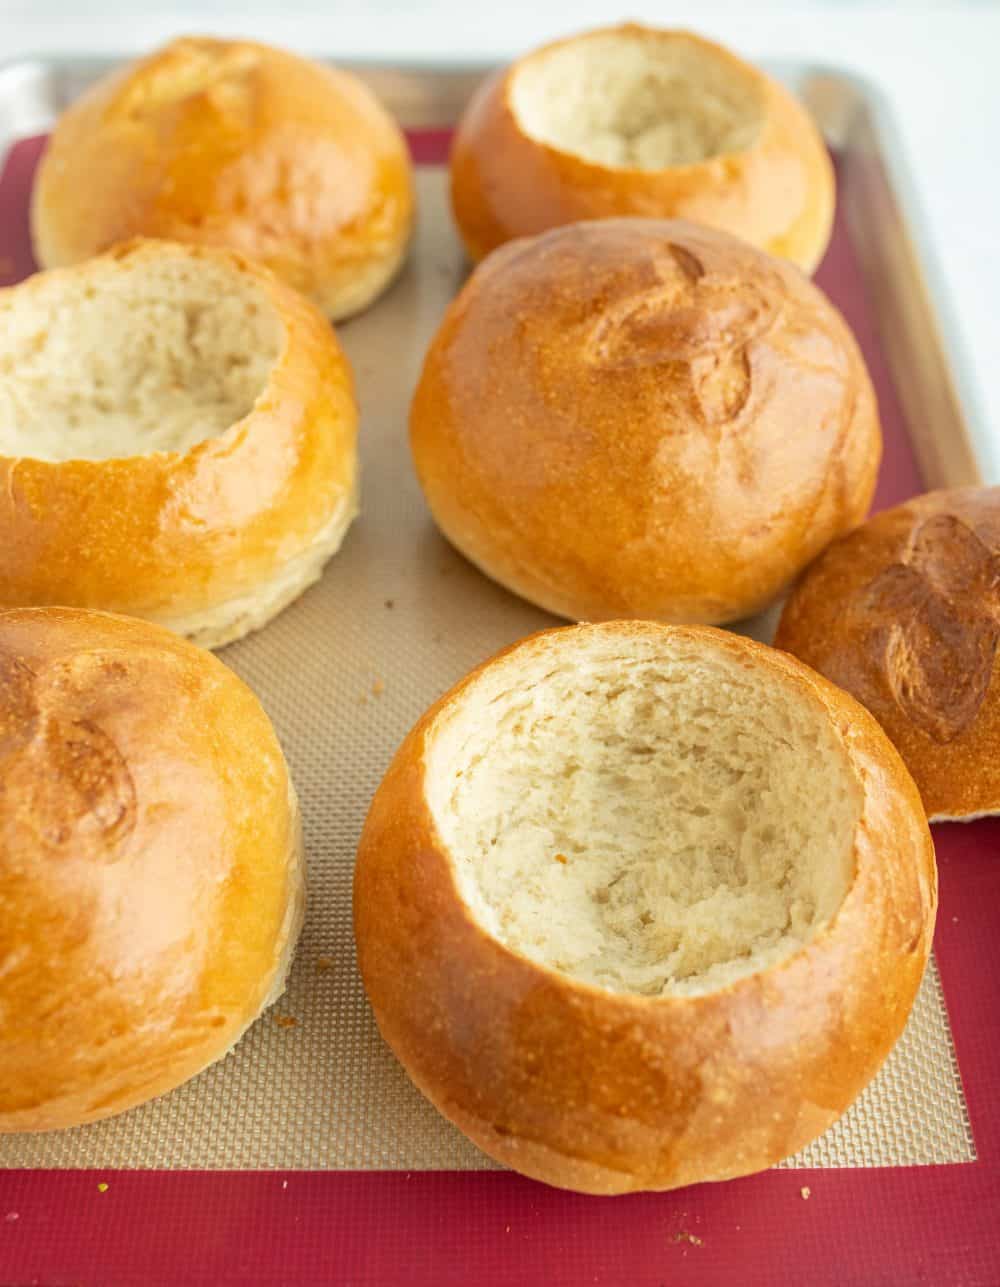 close up 6 large round rolls baked golden brown and a little x on the tops line a silicone baking sheet and a few of the rolls are hollowed for the bread bowl